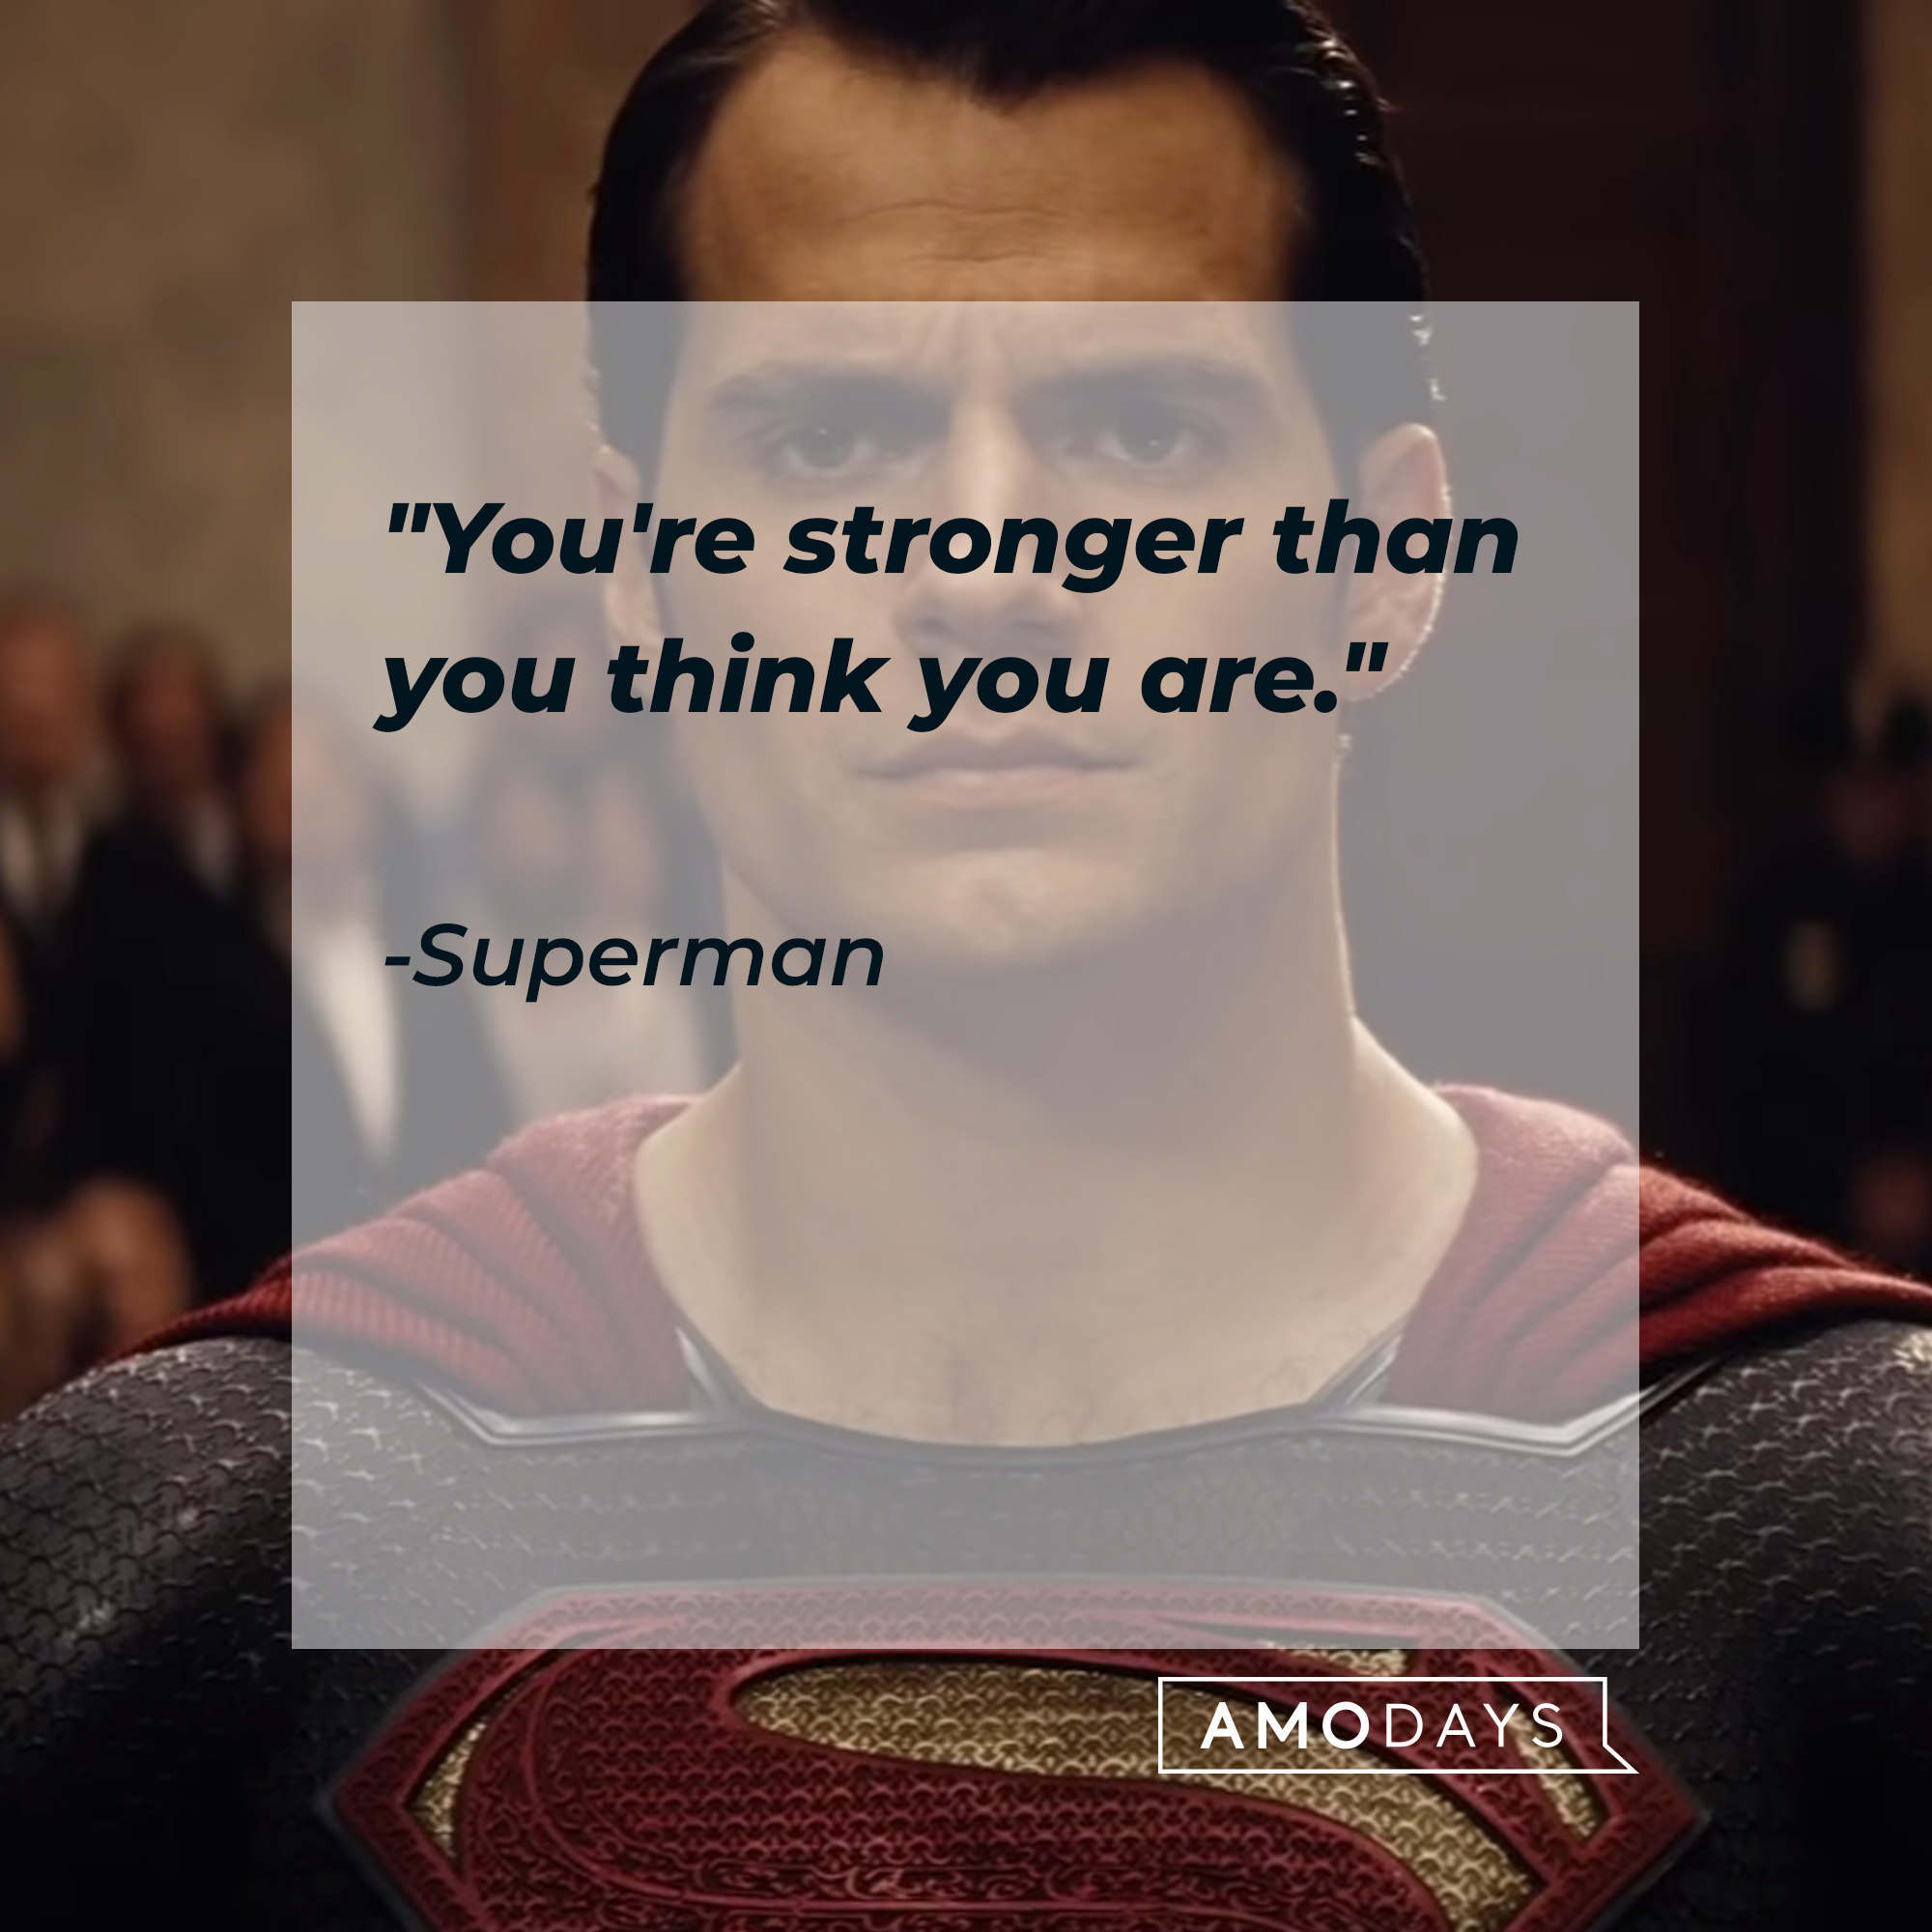 Superman's quote: "You're stronger than you think you are." | Source: facebook.com/dc